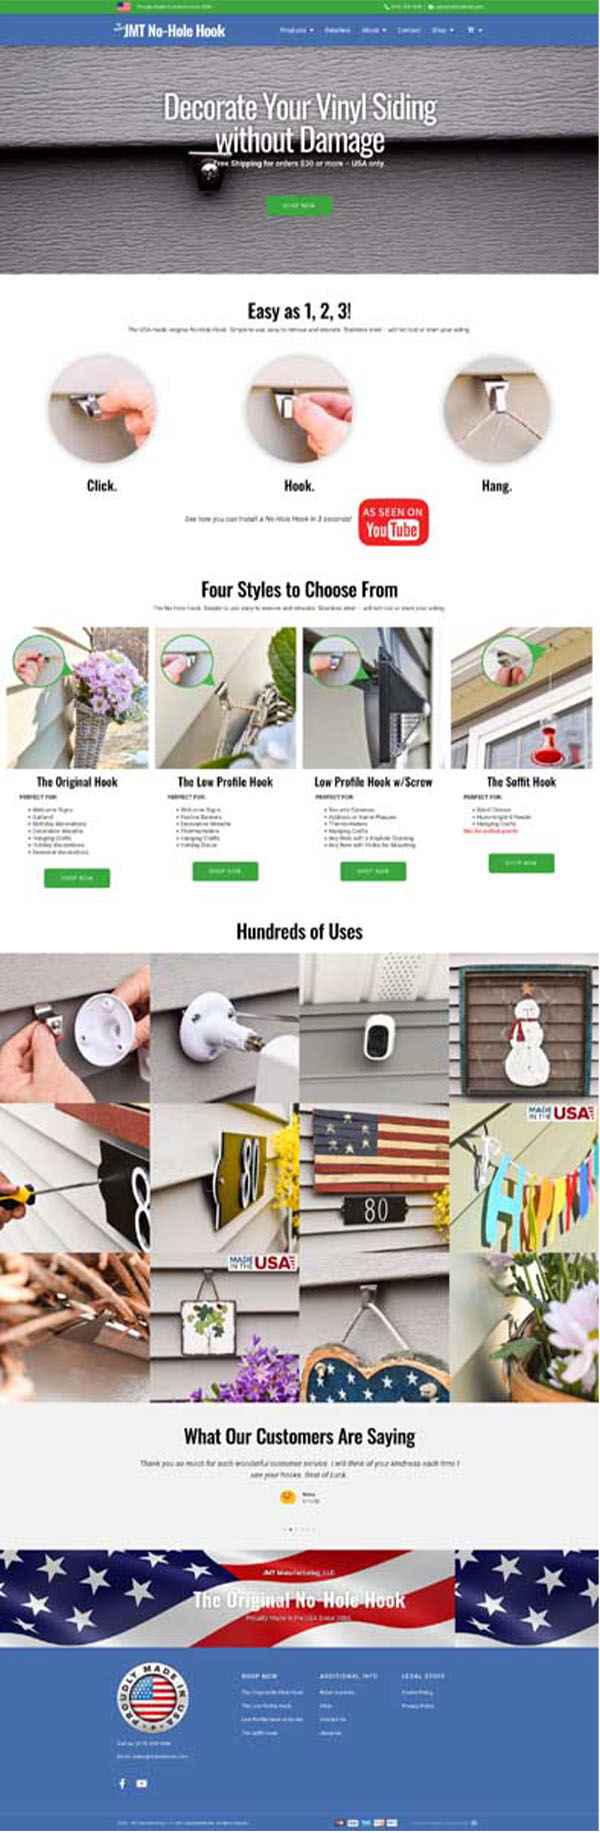 JMT Manufacturing, The Original No-Hole Hook - Retail Product Website Design Scroll example